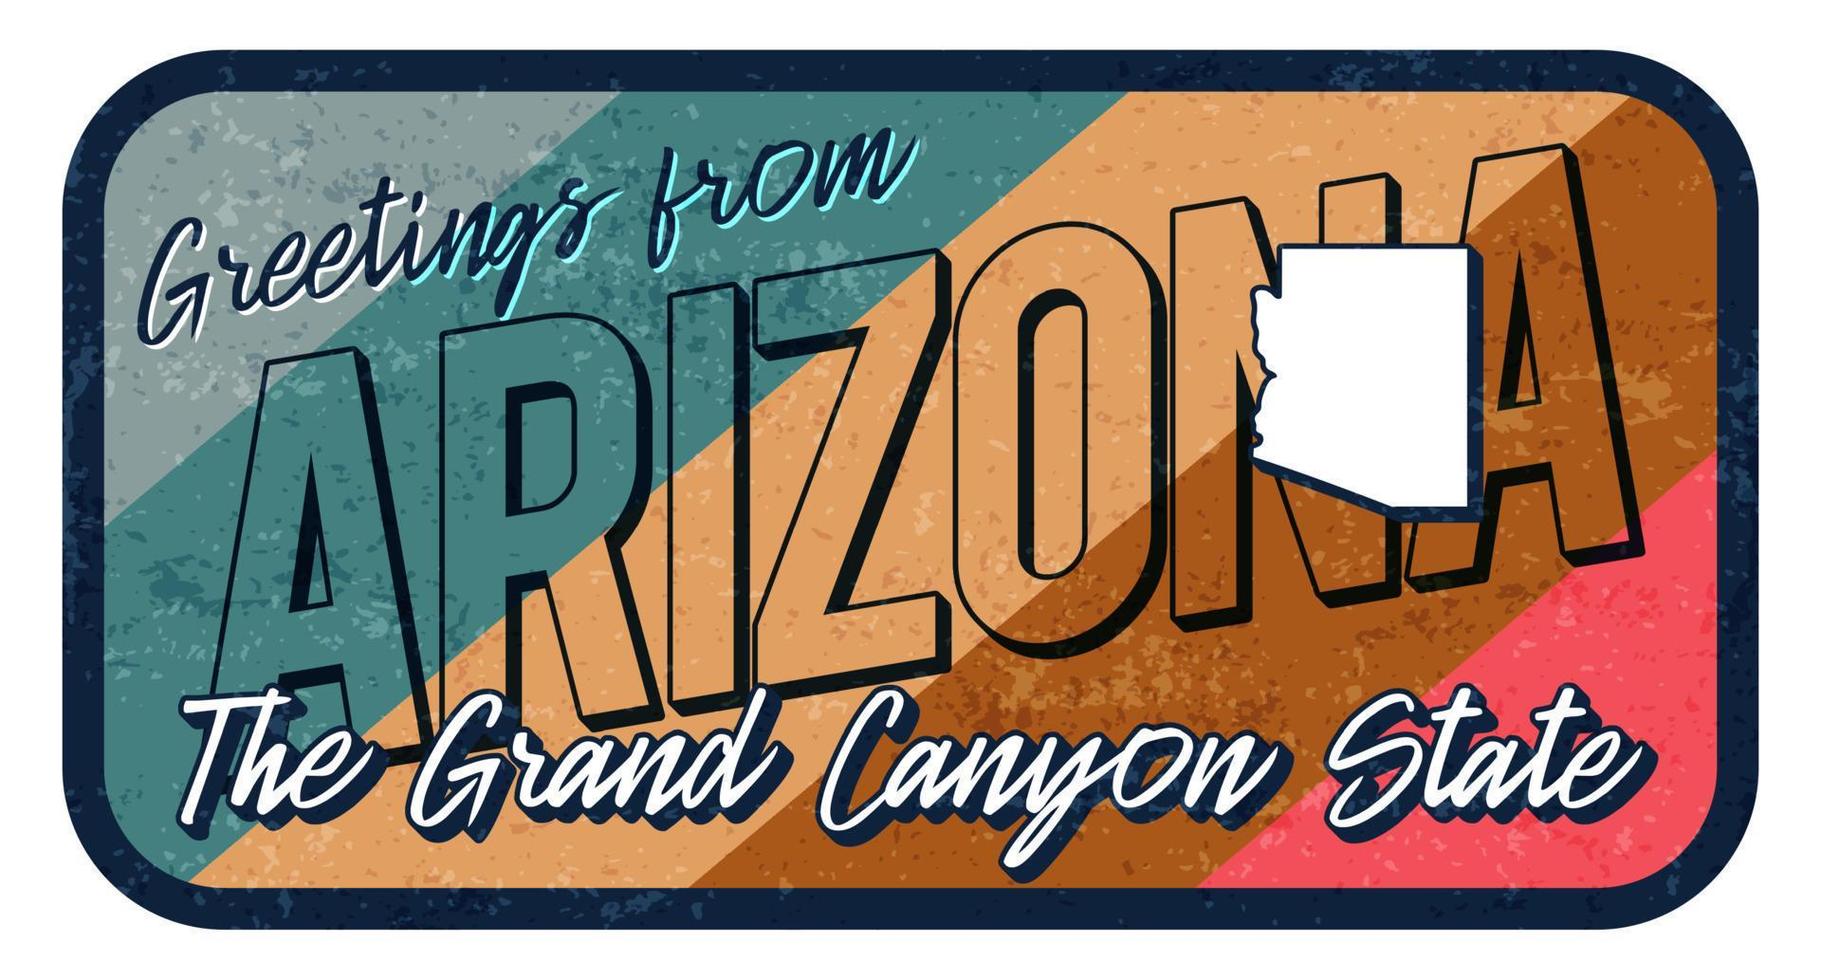 Greeting from Arizona vintage rusty metal sign vector illustration. Vector state map in grunge style with Typography hand drawn lettering